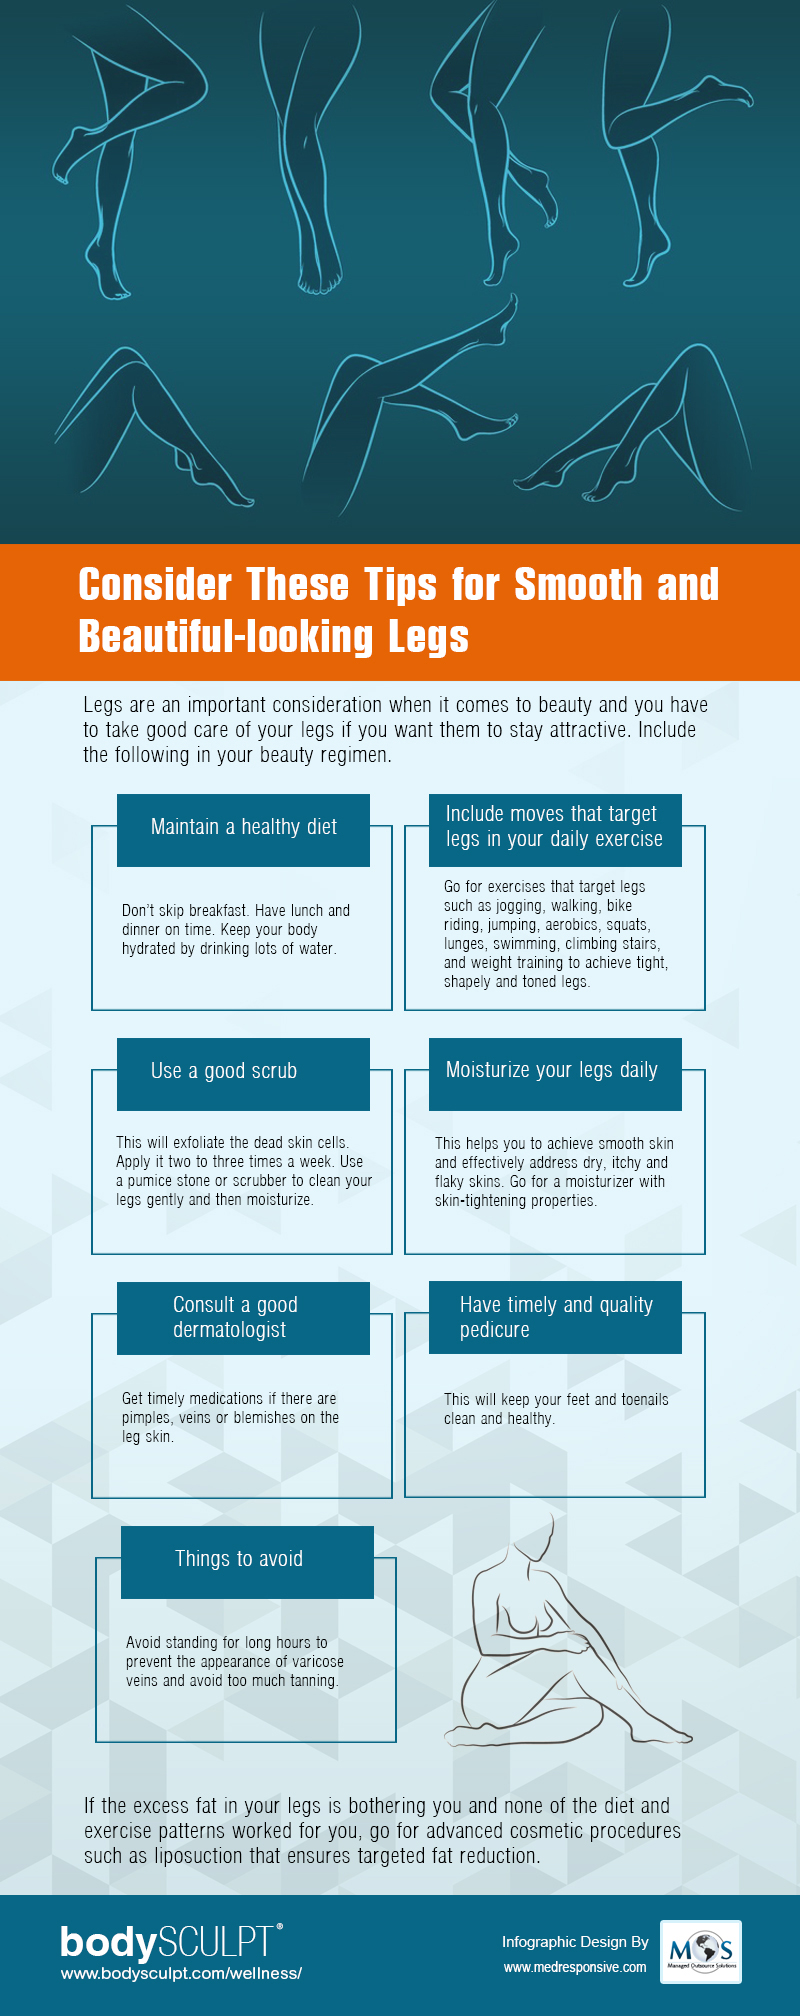 Consider these Tips for Smooth and Beautiful-looking Legs